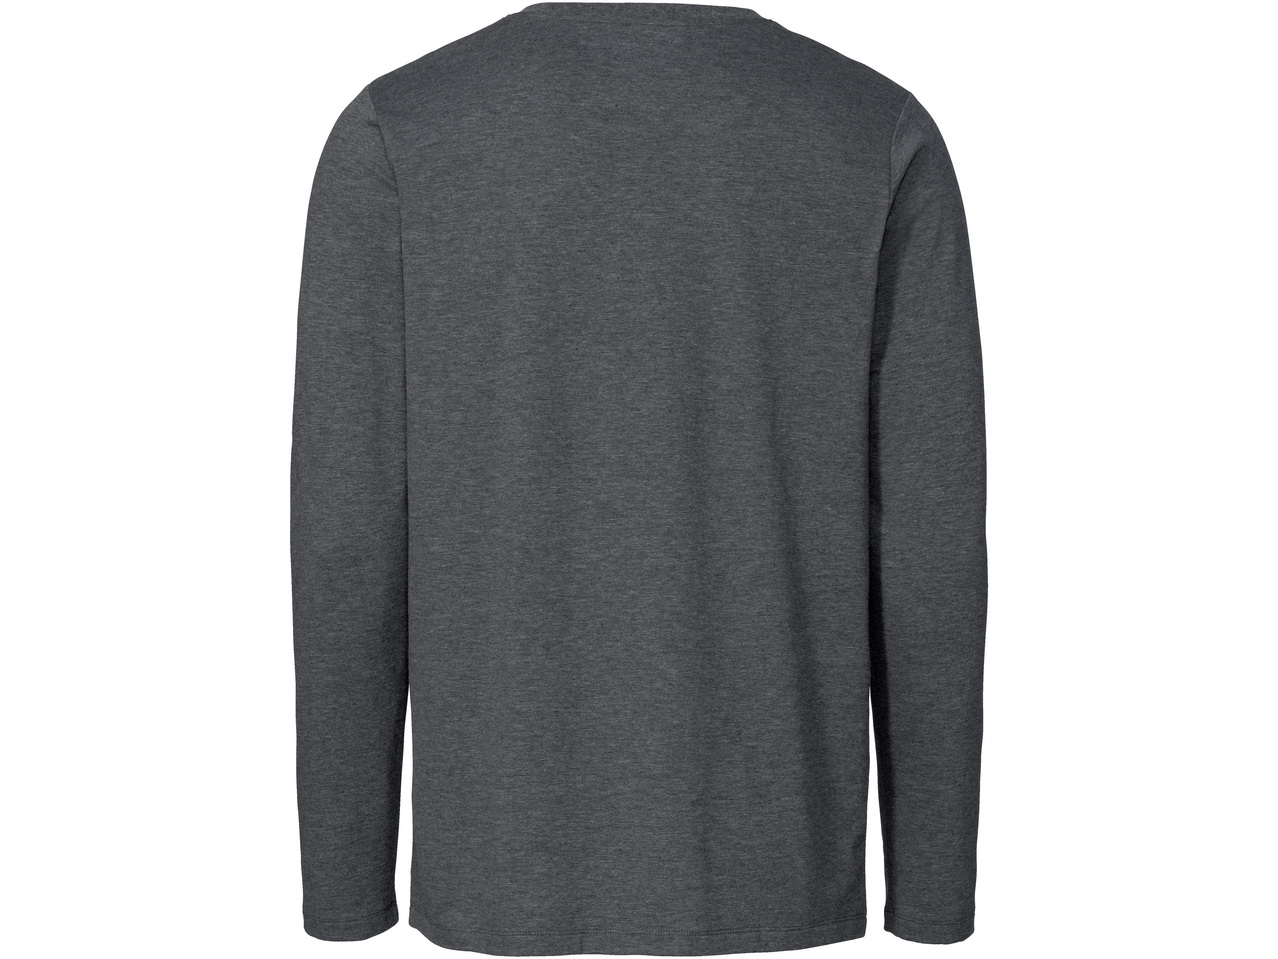 LIVERGY Mens' Thermal Long-Sleeve Top